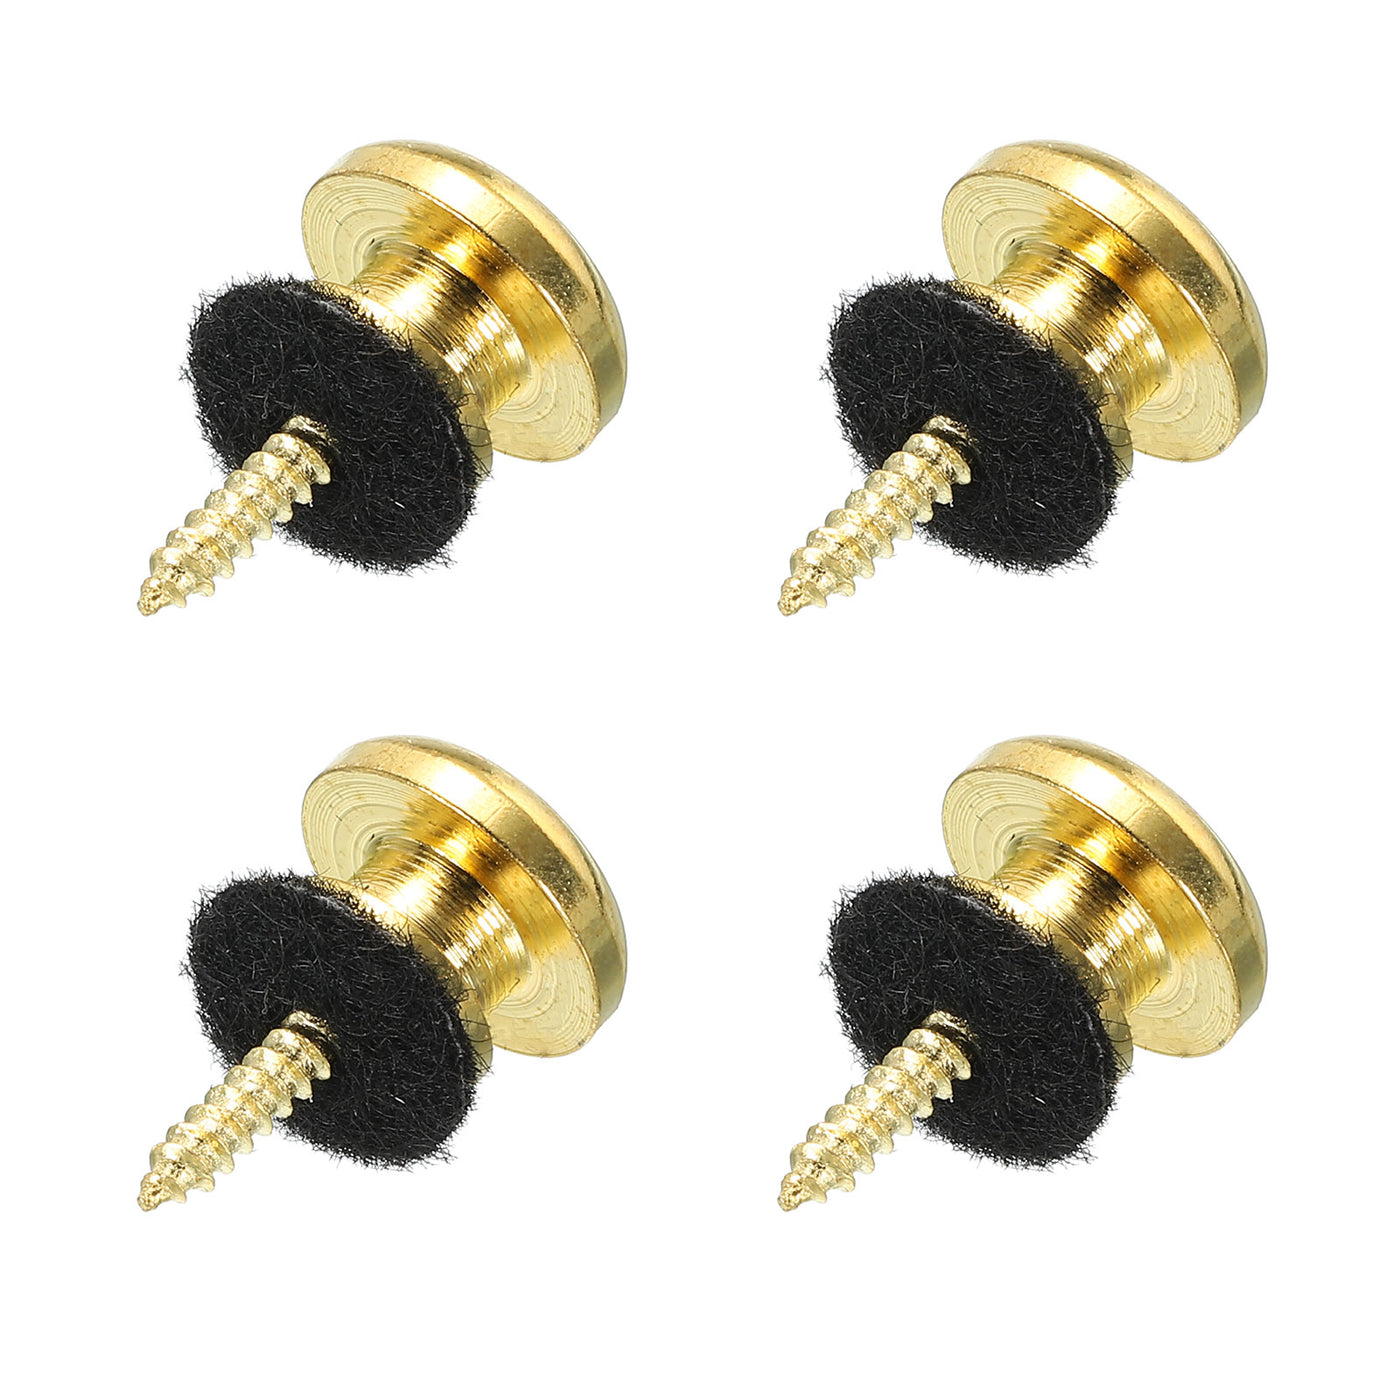 Harfington Guitar Strap Button Buckle Lock Metal Small End Pins with Felt Washer for Guitar Bass